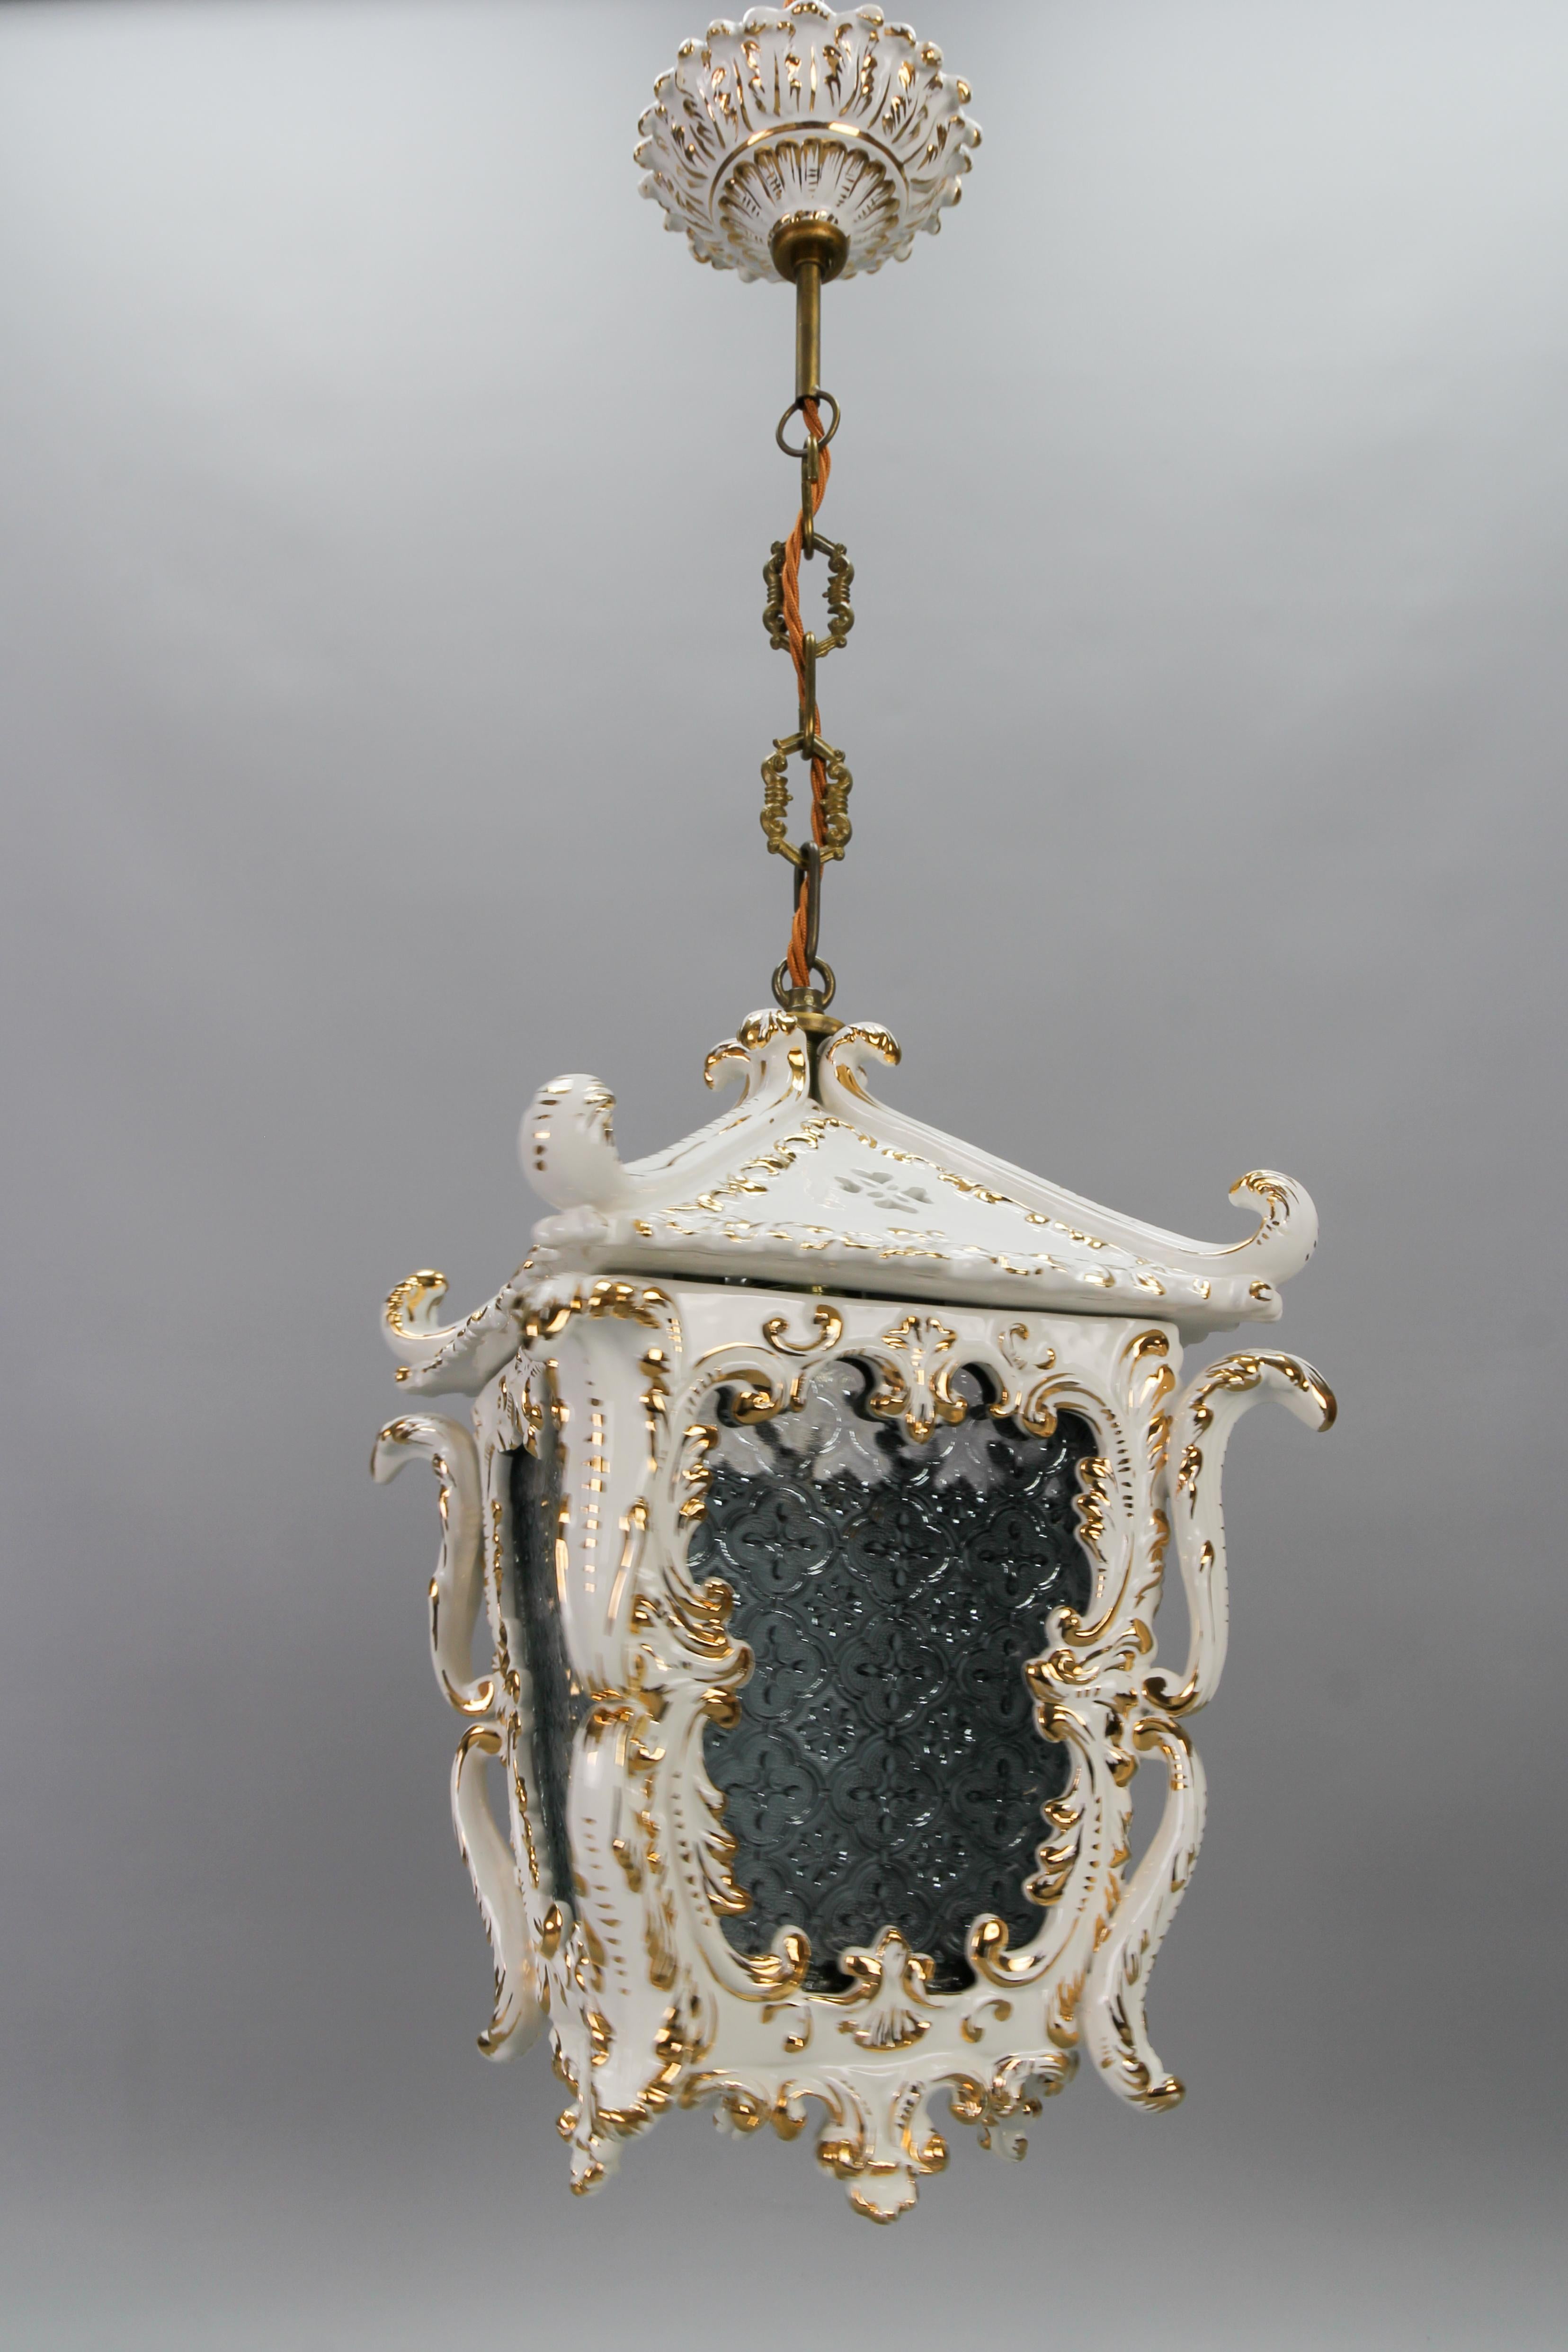 Vintage French Rococo Style White Ceramic and Glass Hanging Lantern, 1970s For Sale 5